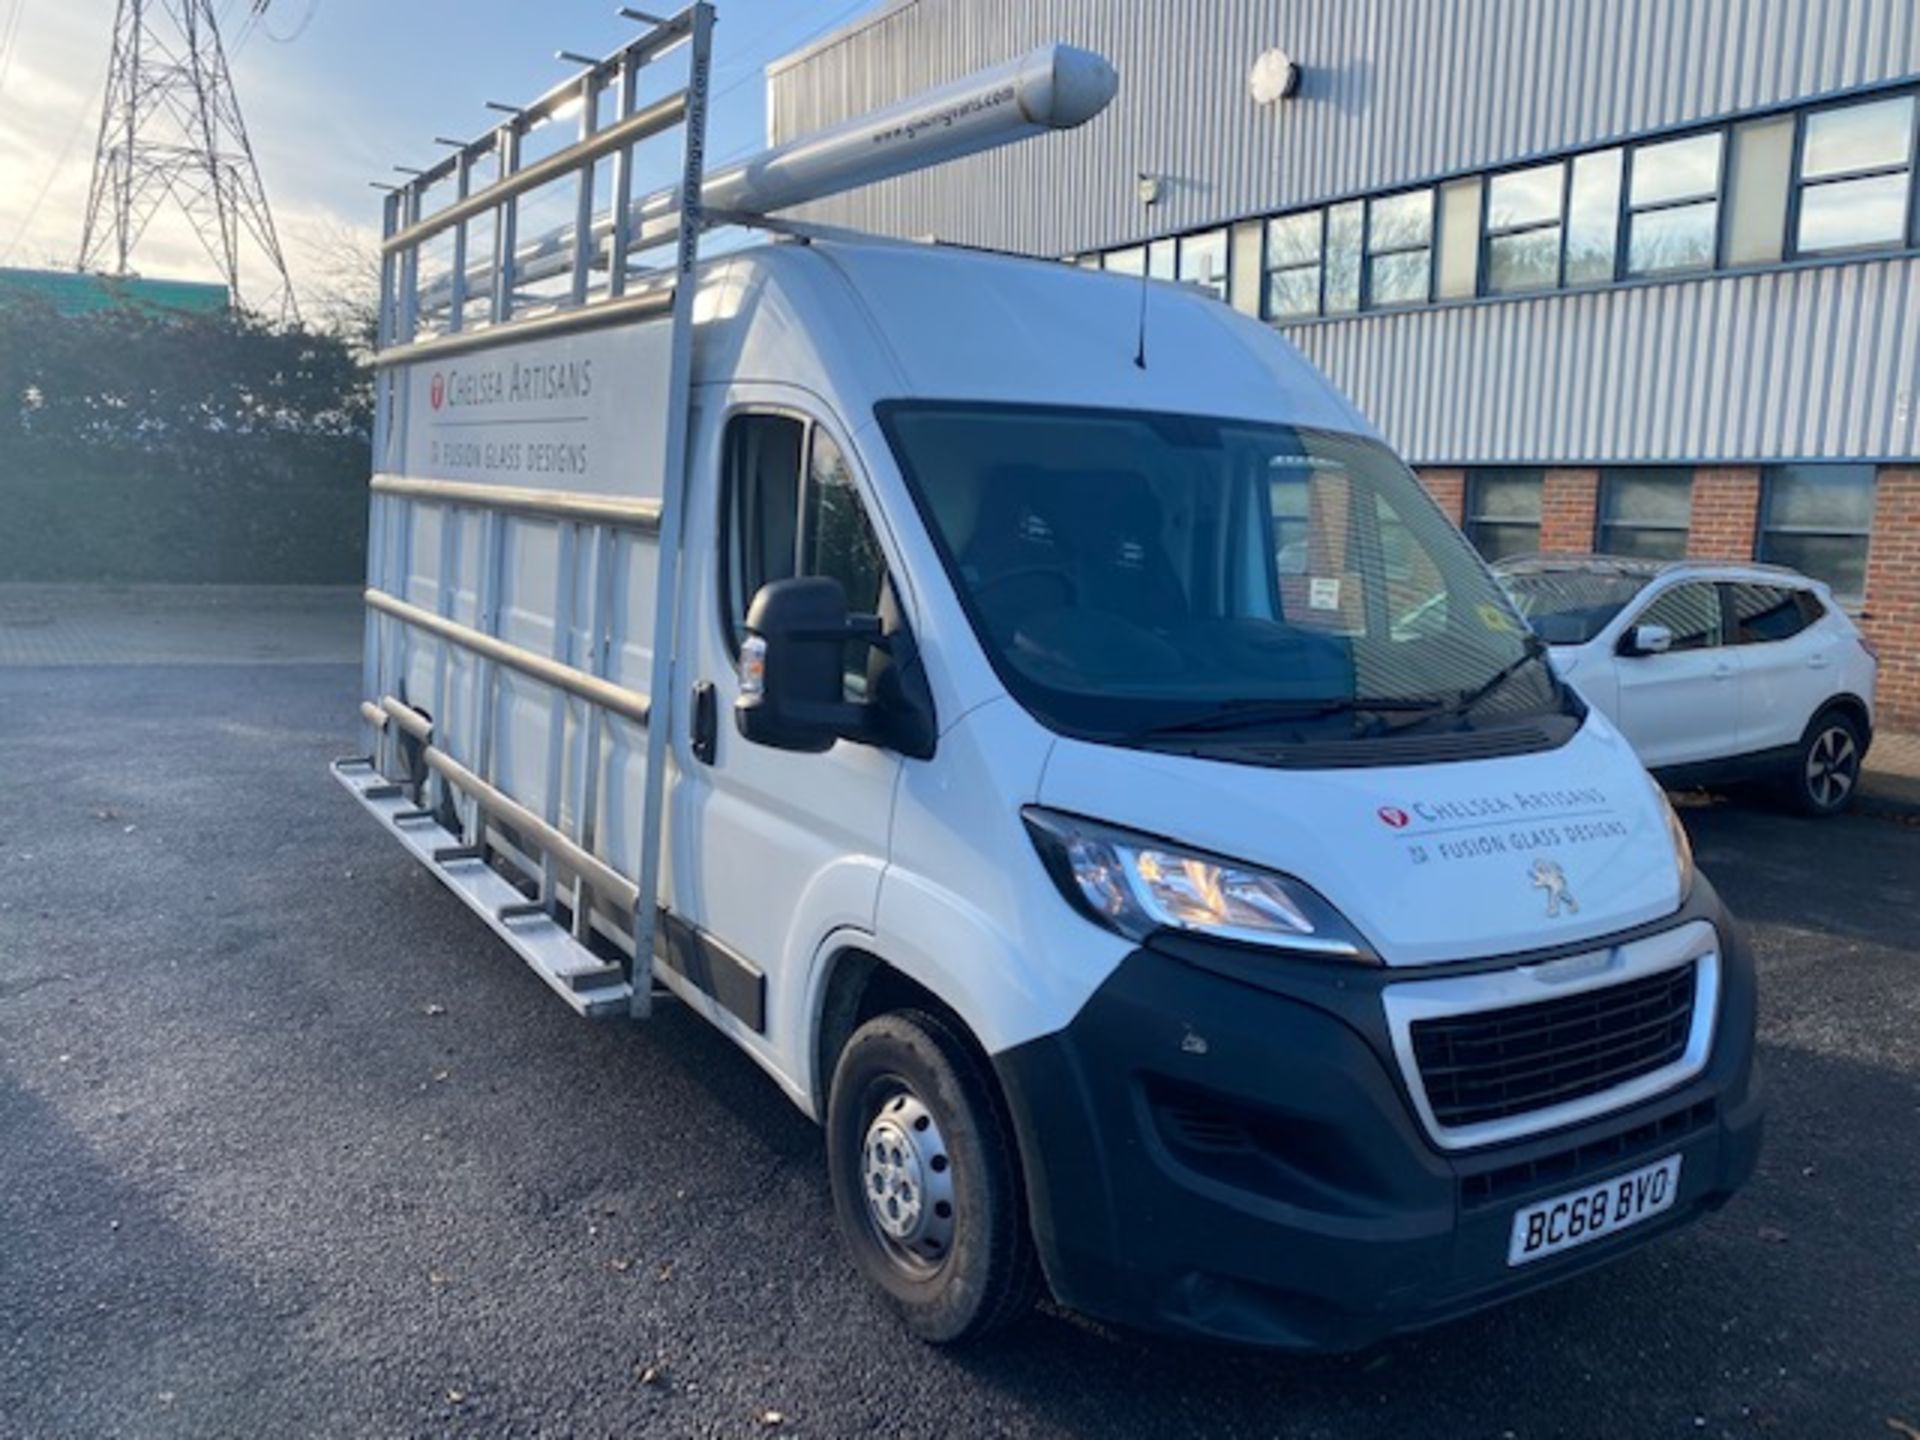 Peugeot Boxer van complete with glazing rail 3.6 x 2.6m, rear ladder, Rhino Van Vault Tube and